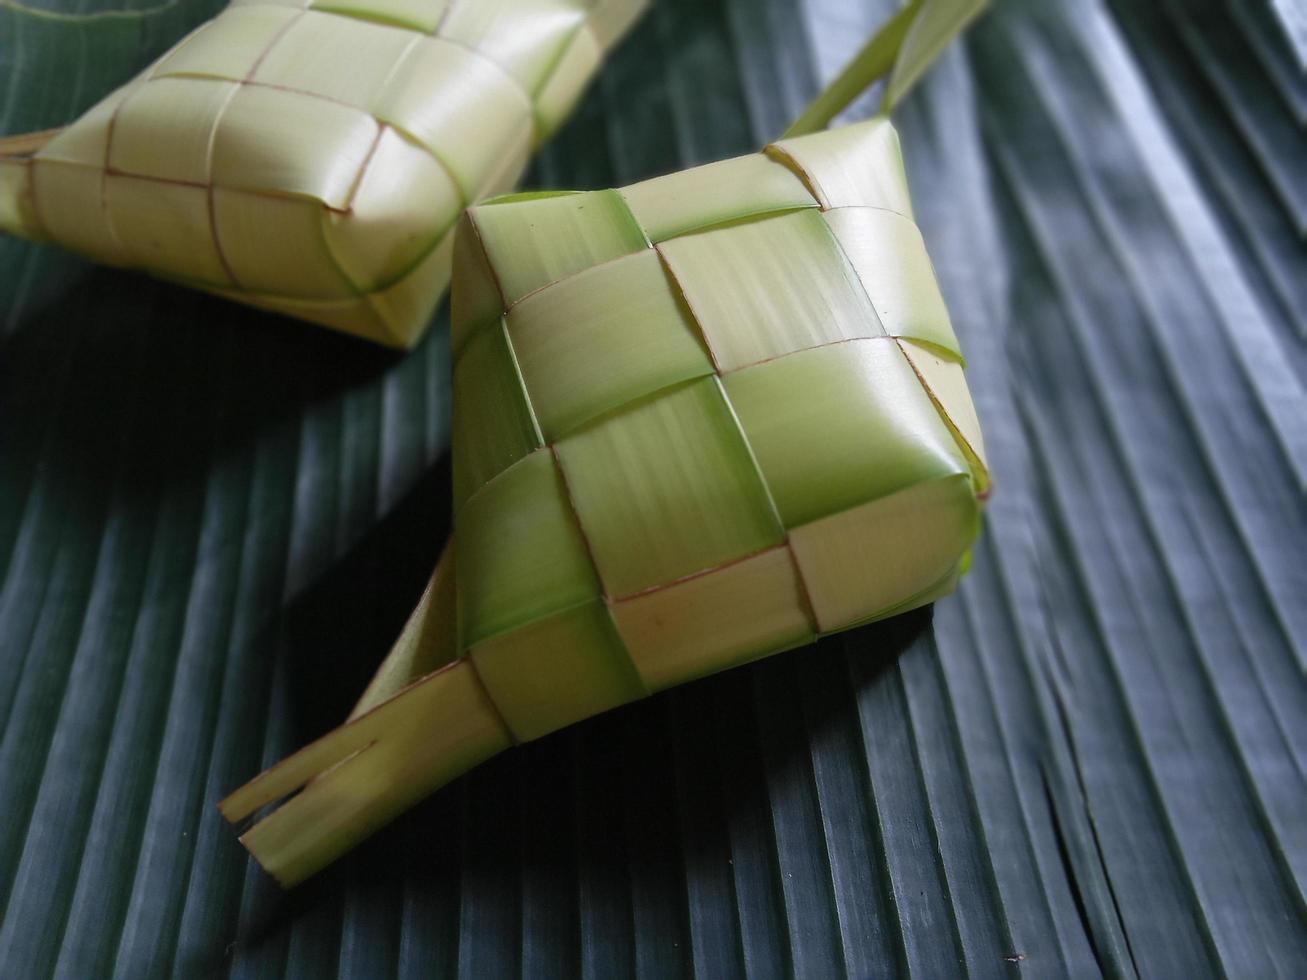 Ketupat or rice dumpling is a local delicacy during the festive season. Ketupats, a natural rice casing made from young coconut leaves for cooking rice isolated on a white background photo